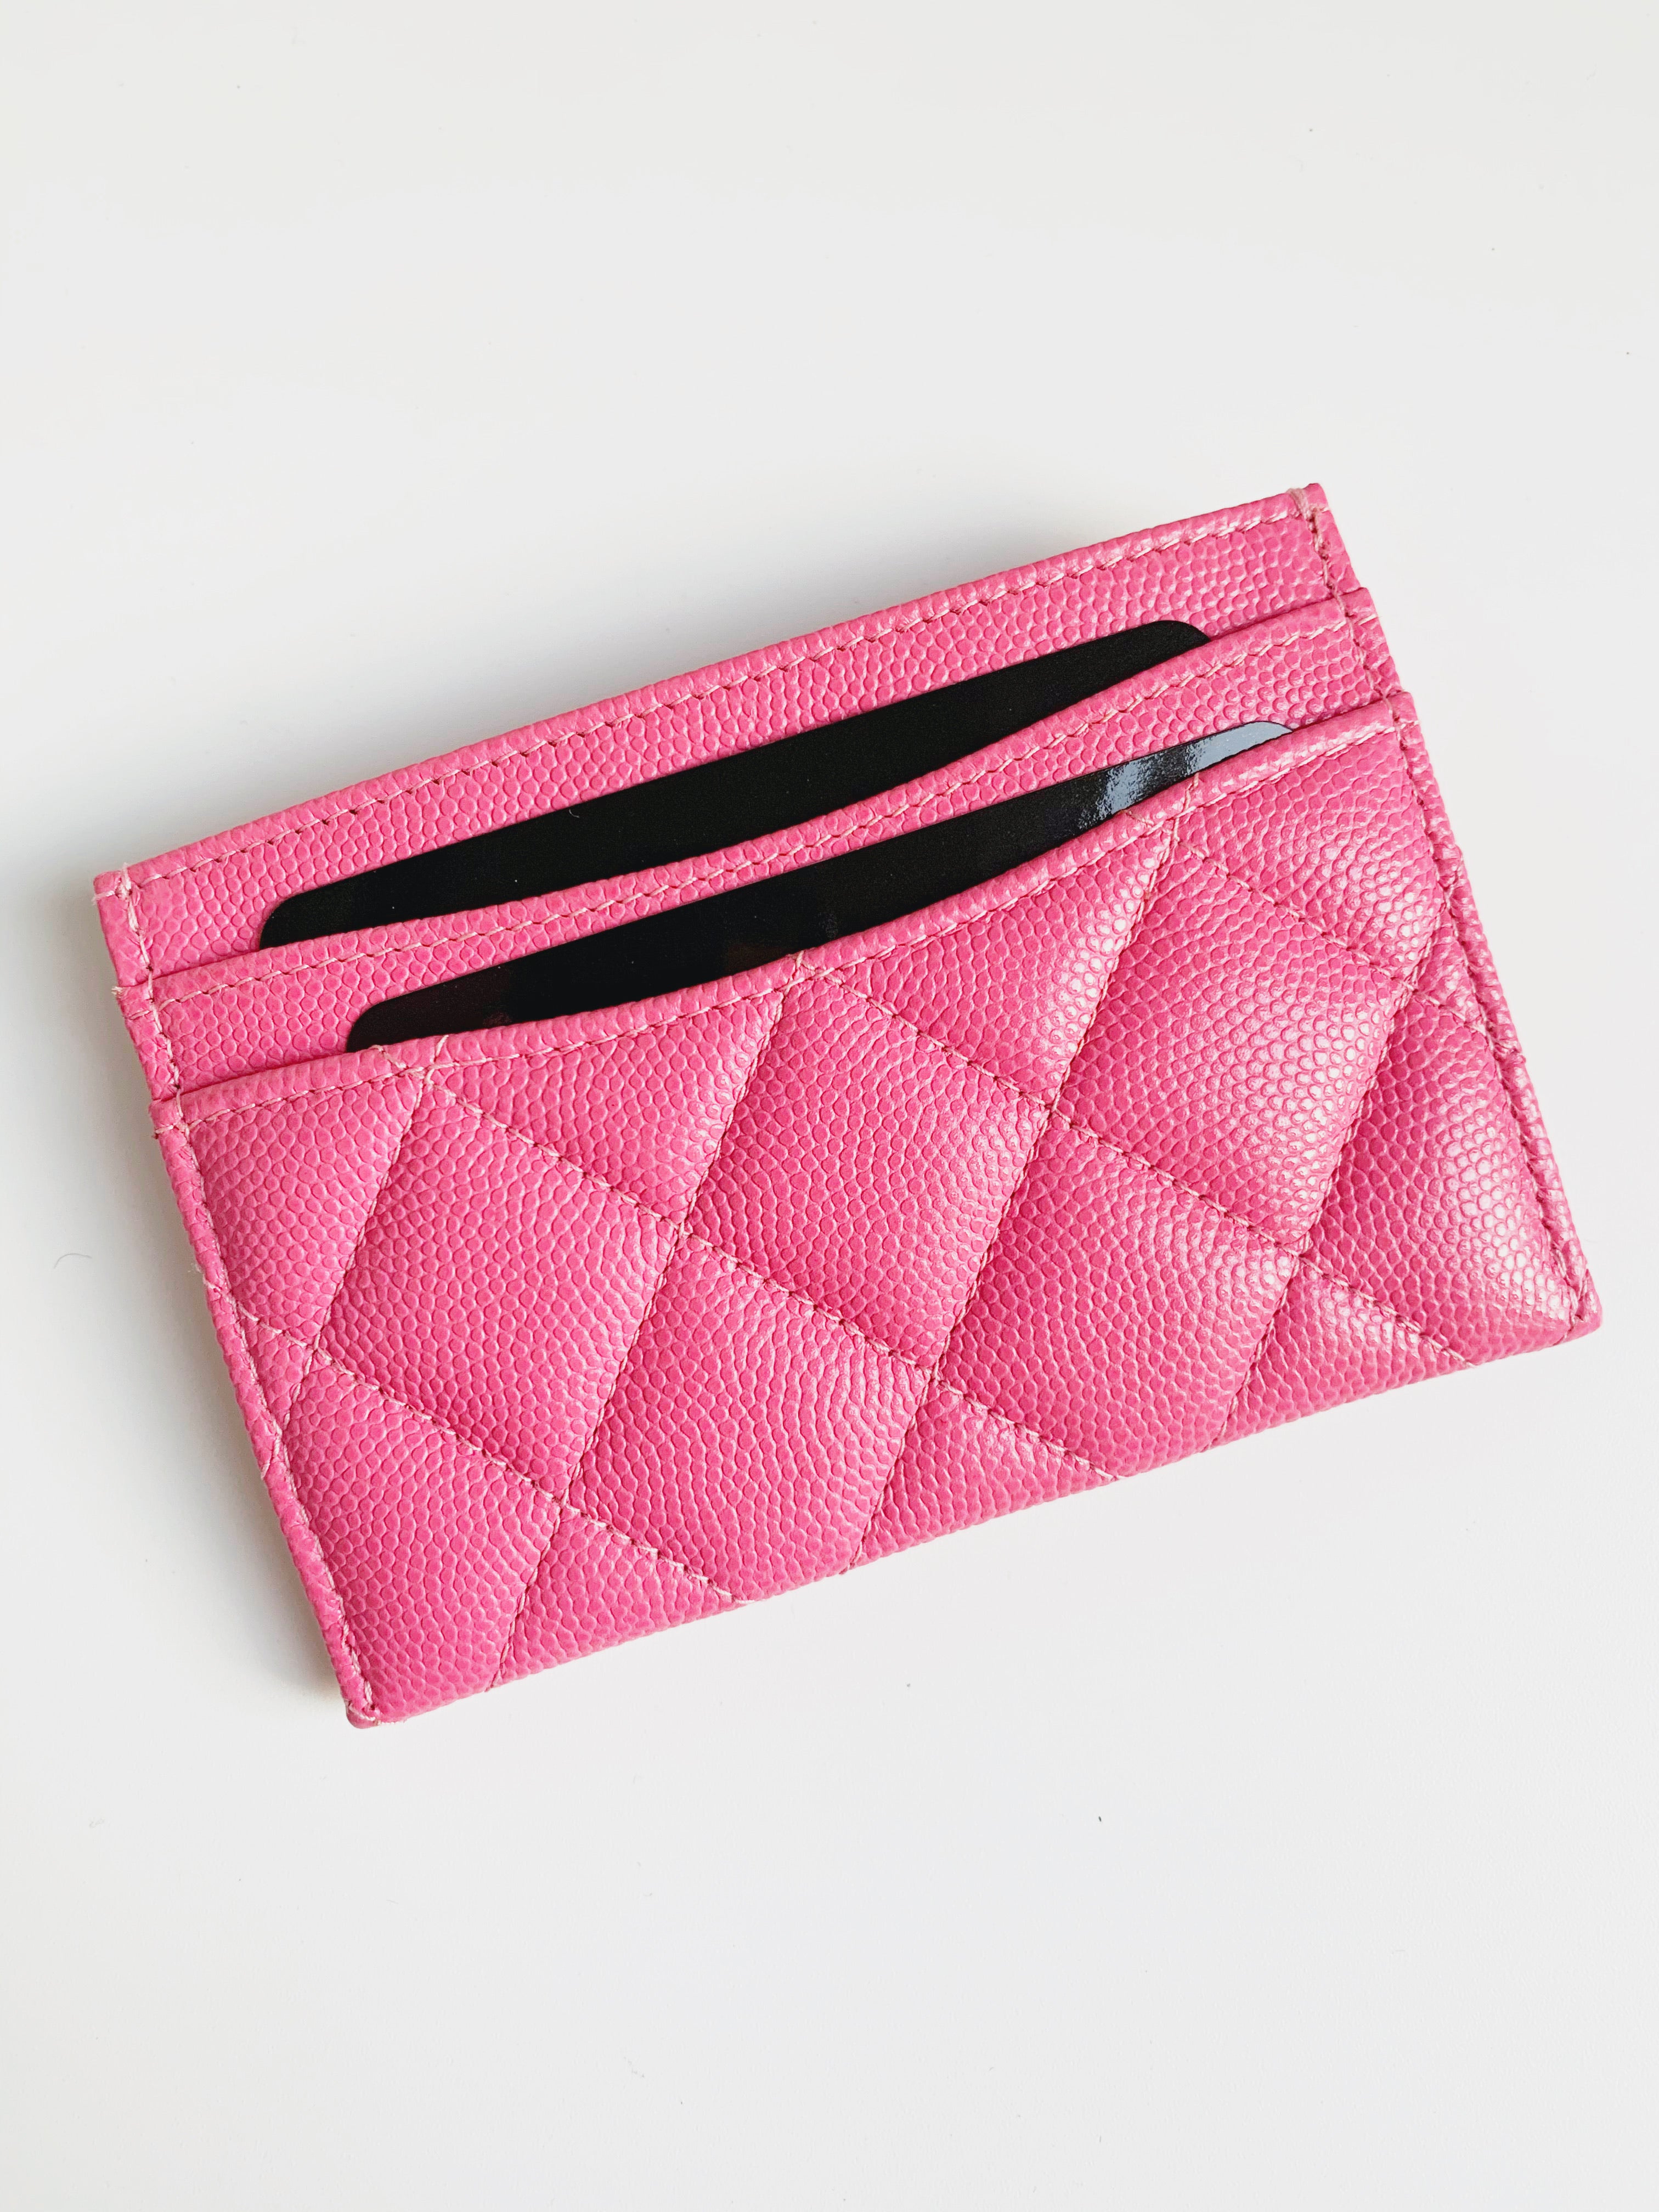 Chanel 2021 2021 Chanel 19 Card Holder Card Holder  Pink Wallets  Accessories  CHA582325  The RealReal